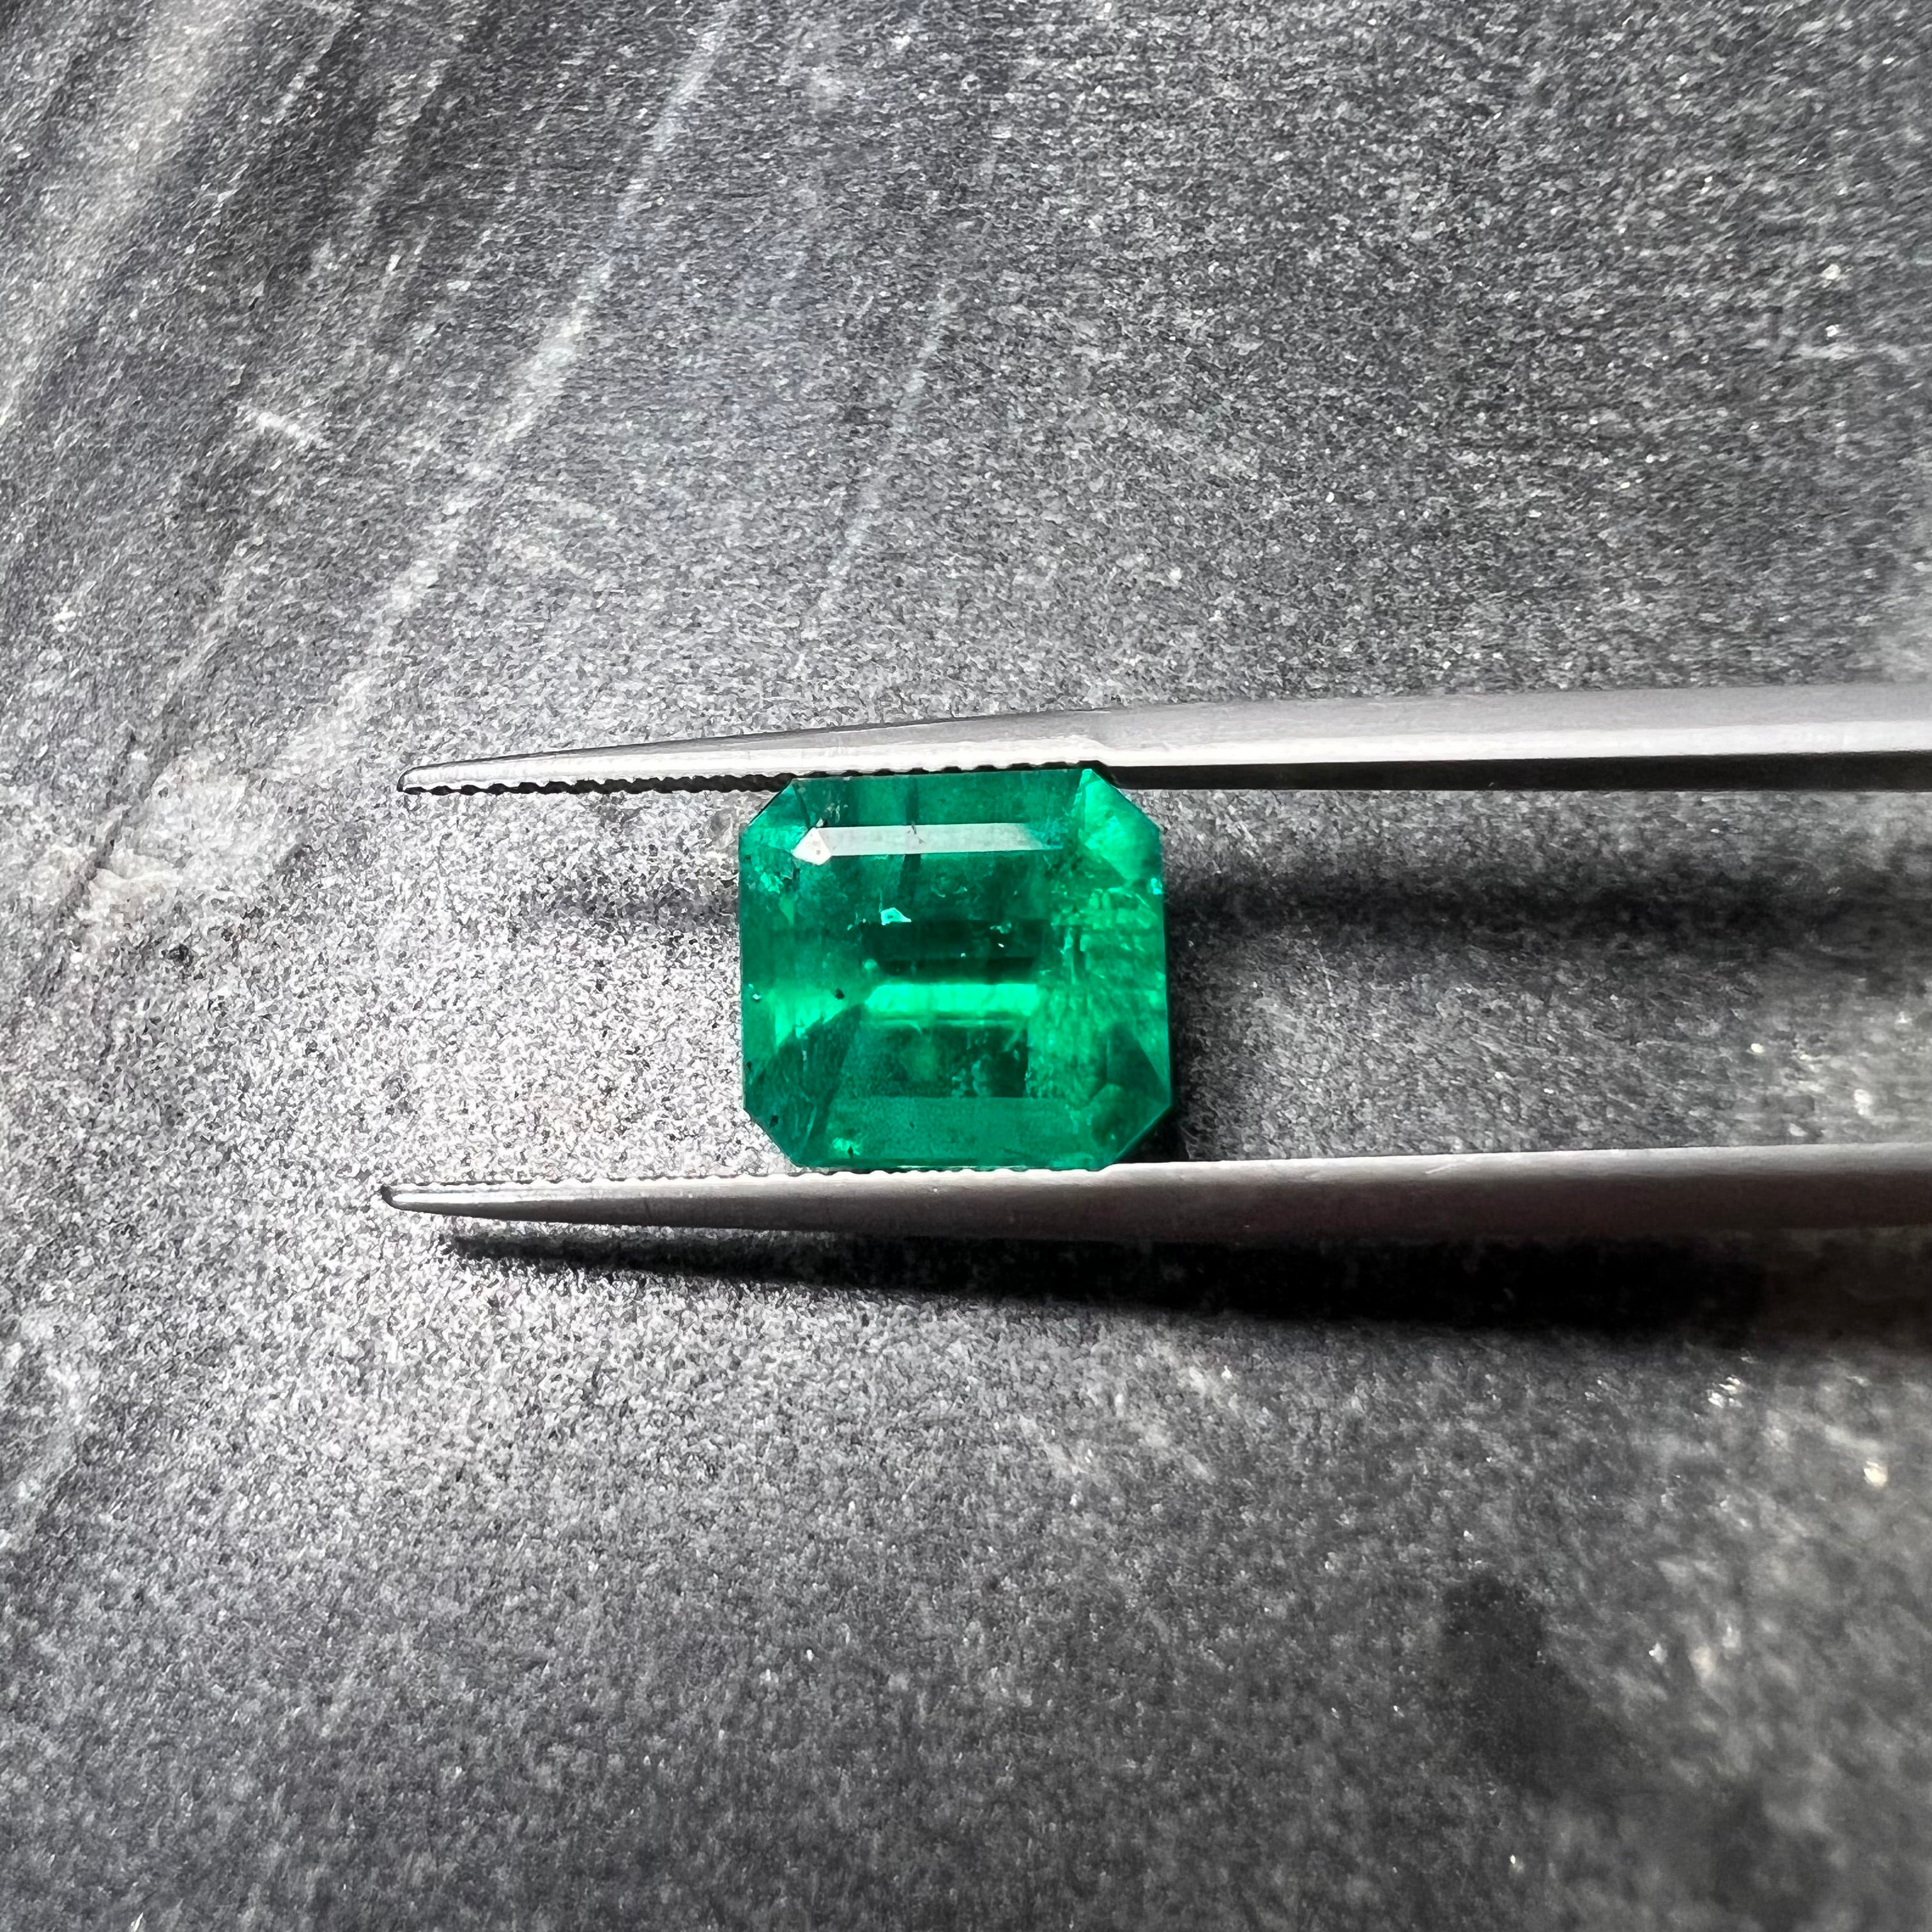 4.22CT loose Natural Colombian Emerald Octagonal Step Cut 10.46x9.74x6.38mm